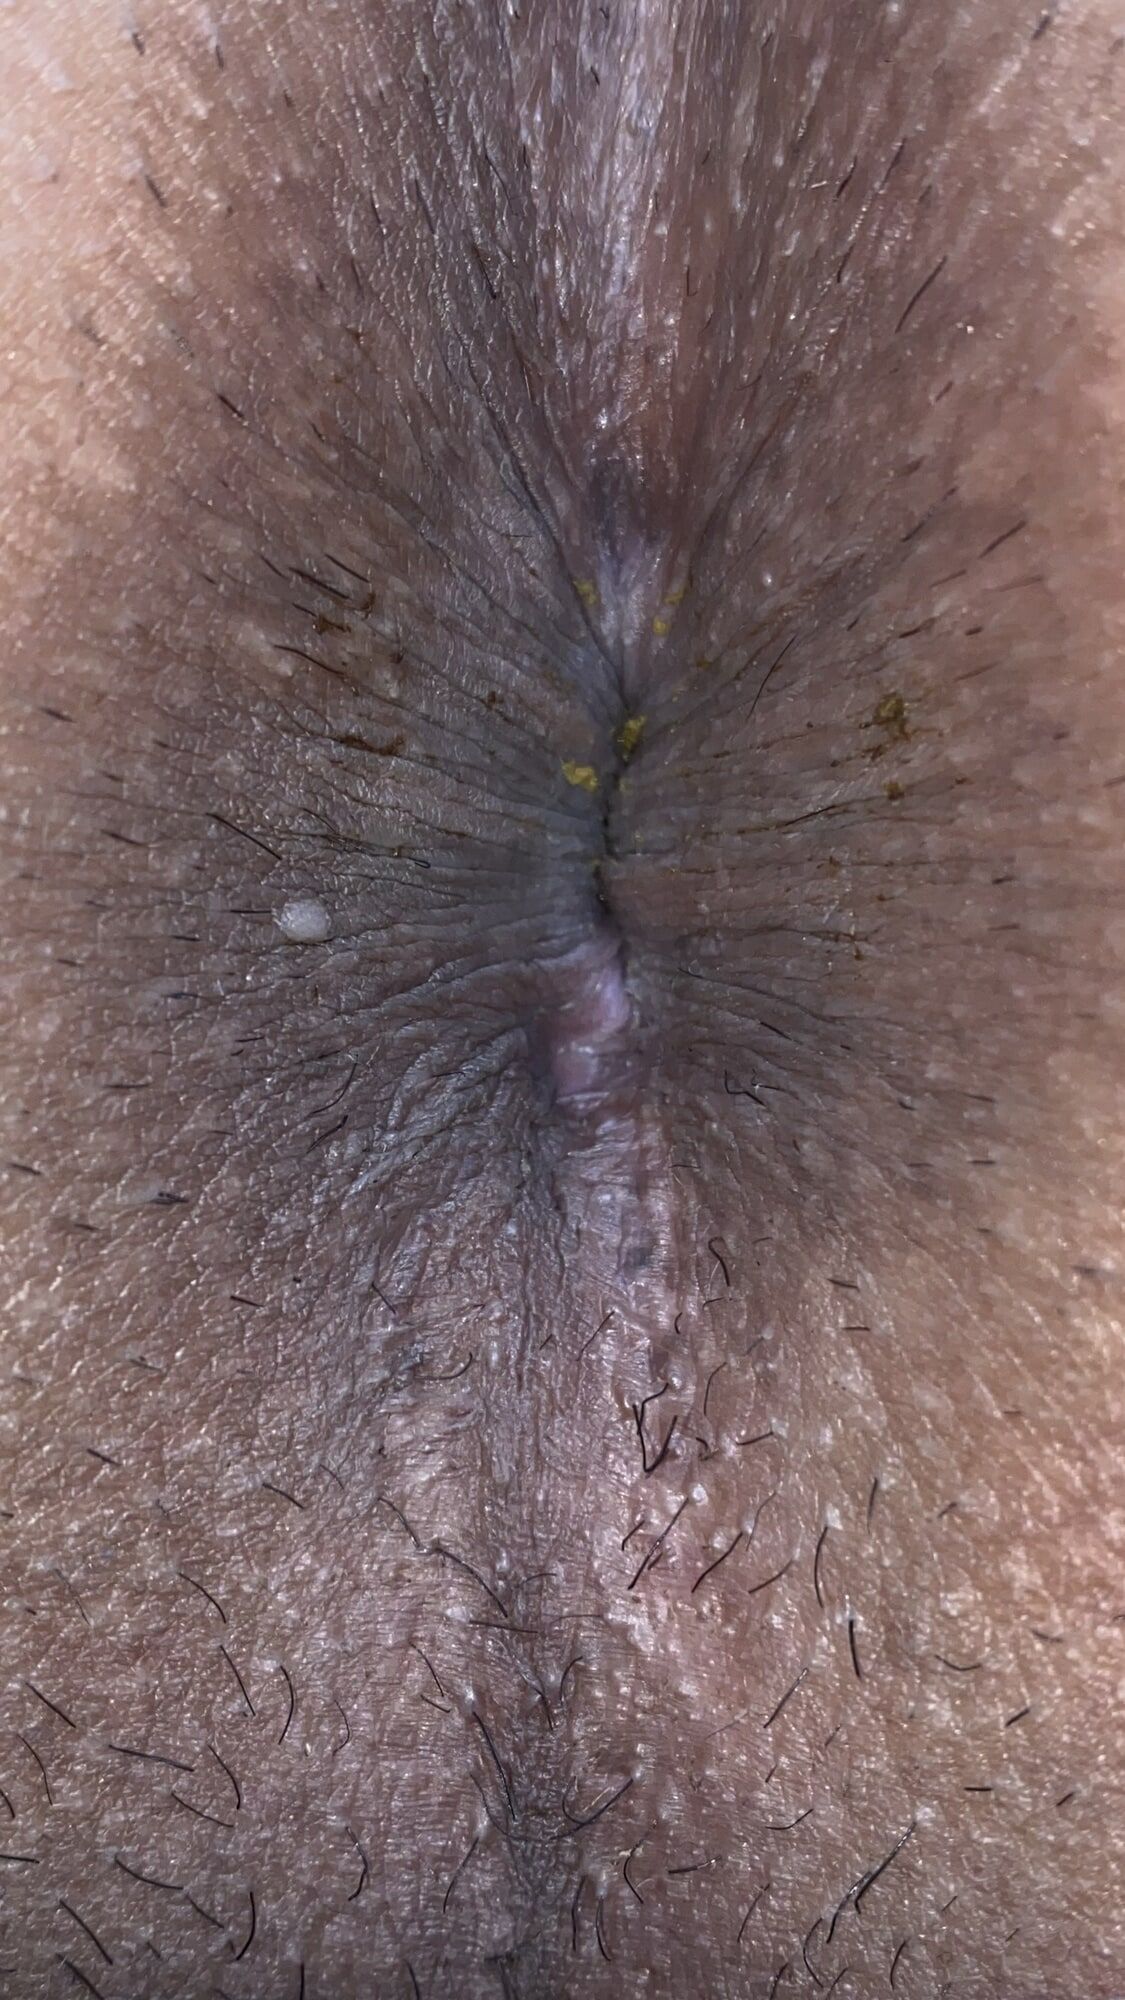 An image of my anus that is clear to every single wrinkle #12